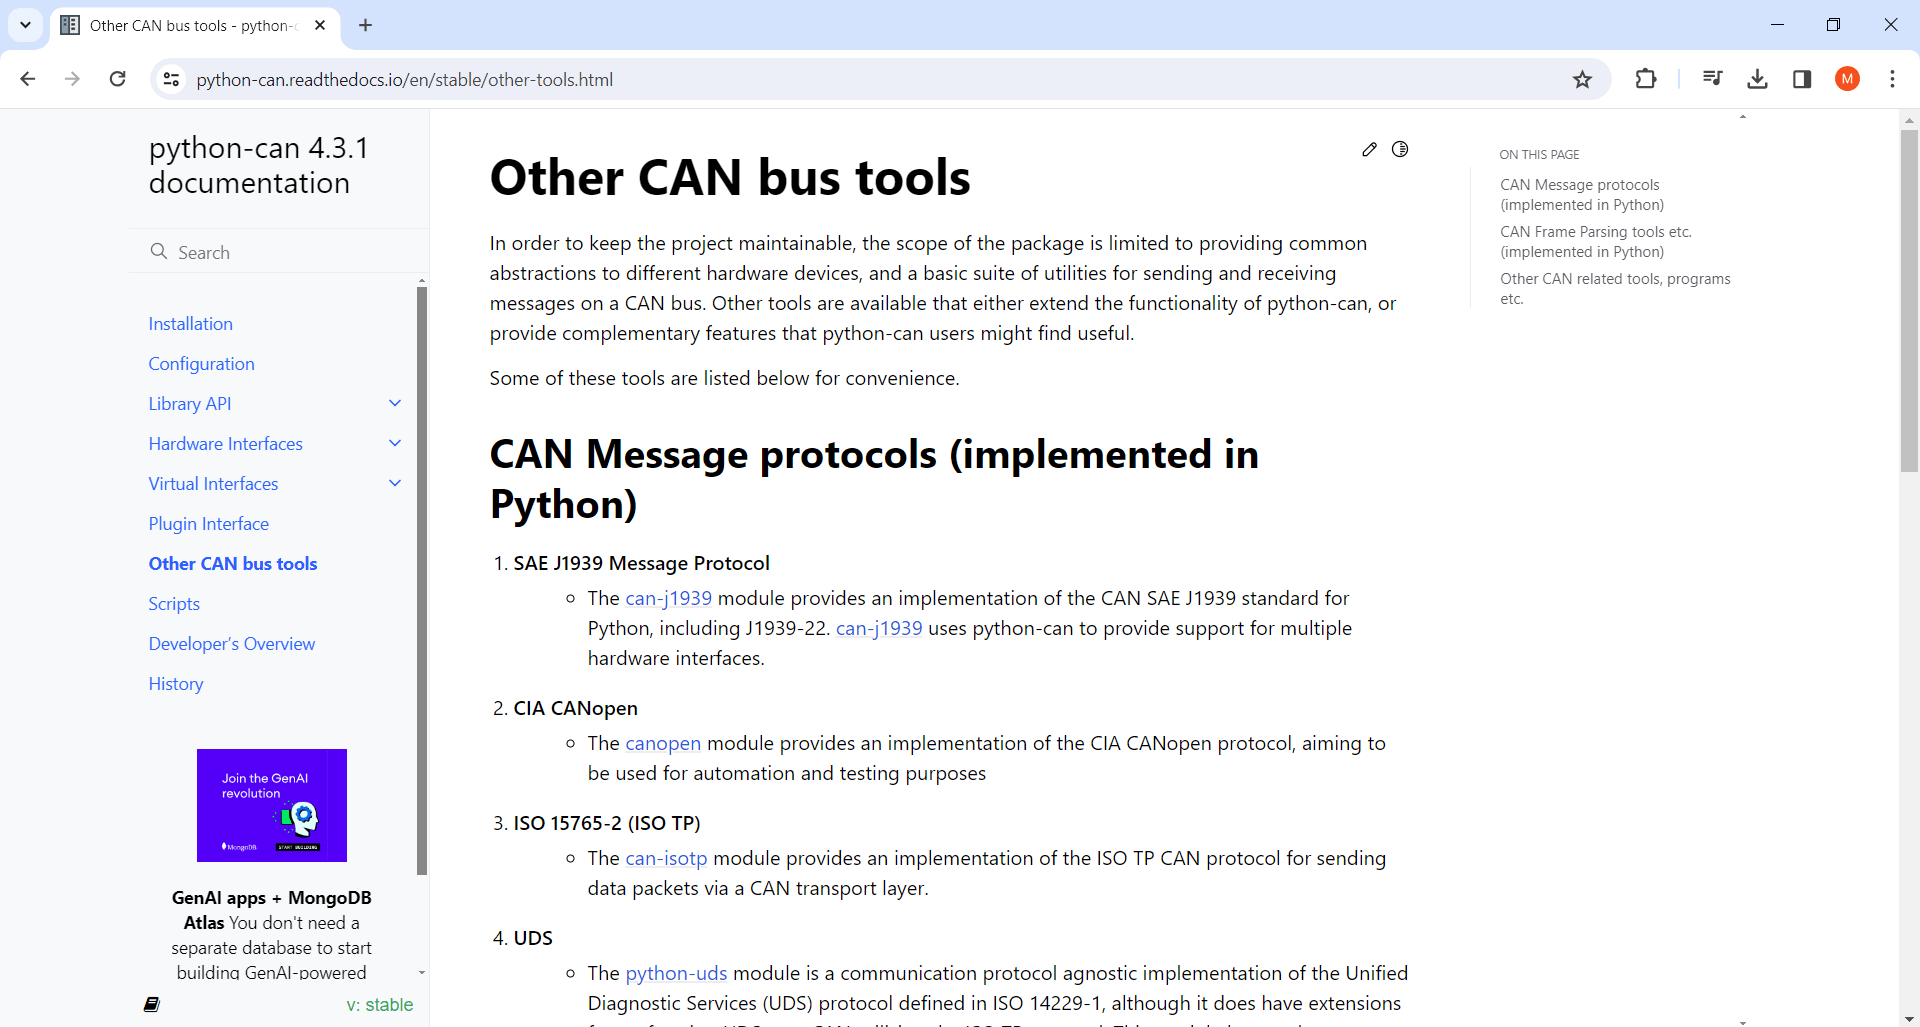 python-can extensions protocols